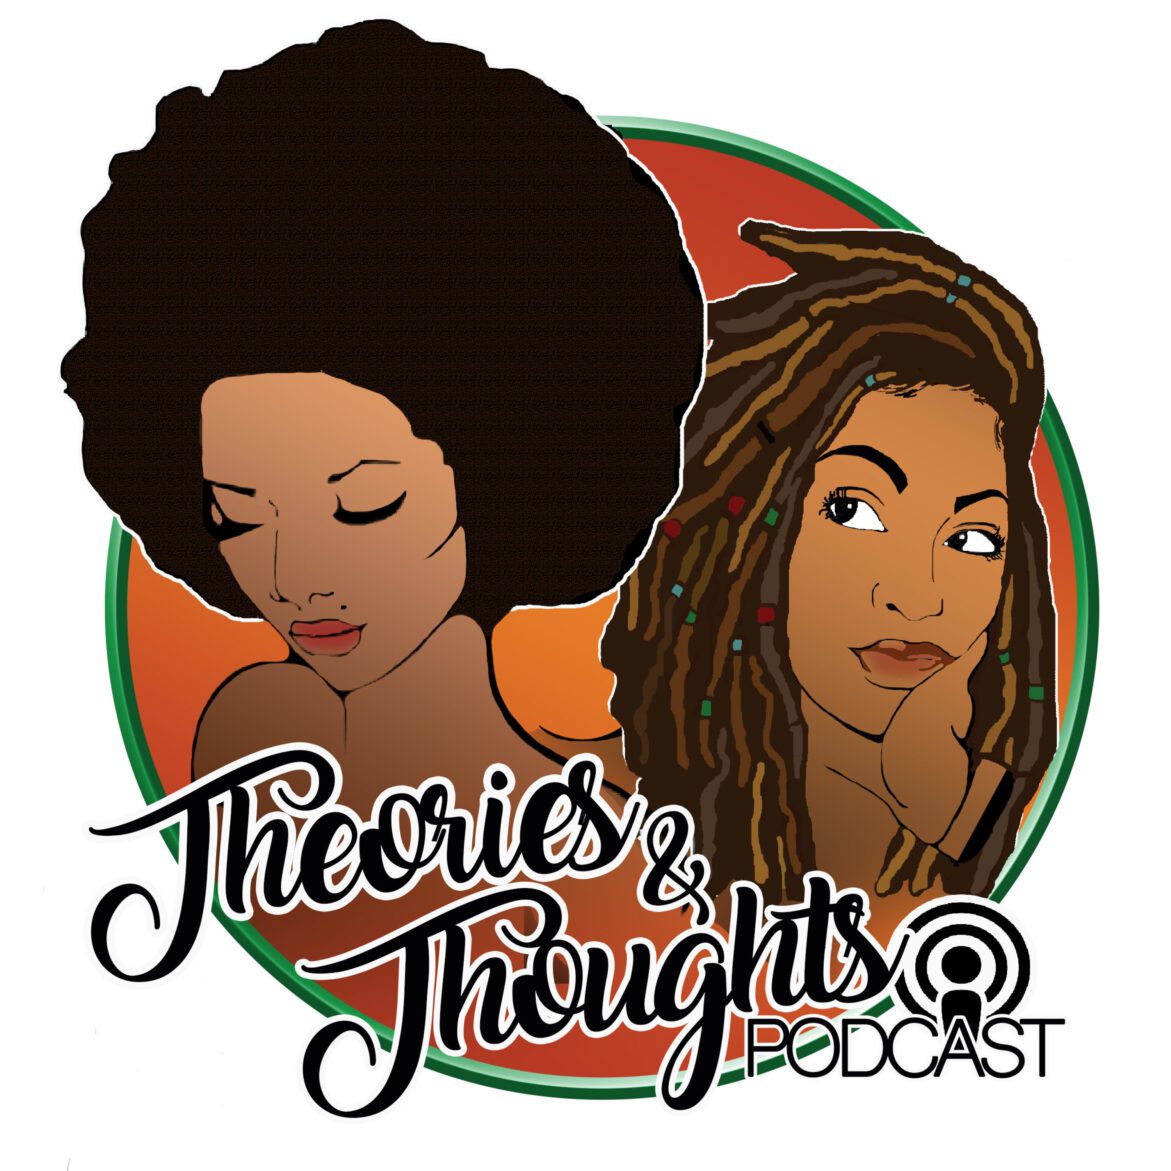 Black Podcasting - Theories & Thoughts: Episode 58- Season Proofing Your Hair with Sharona Luke